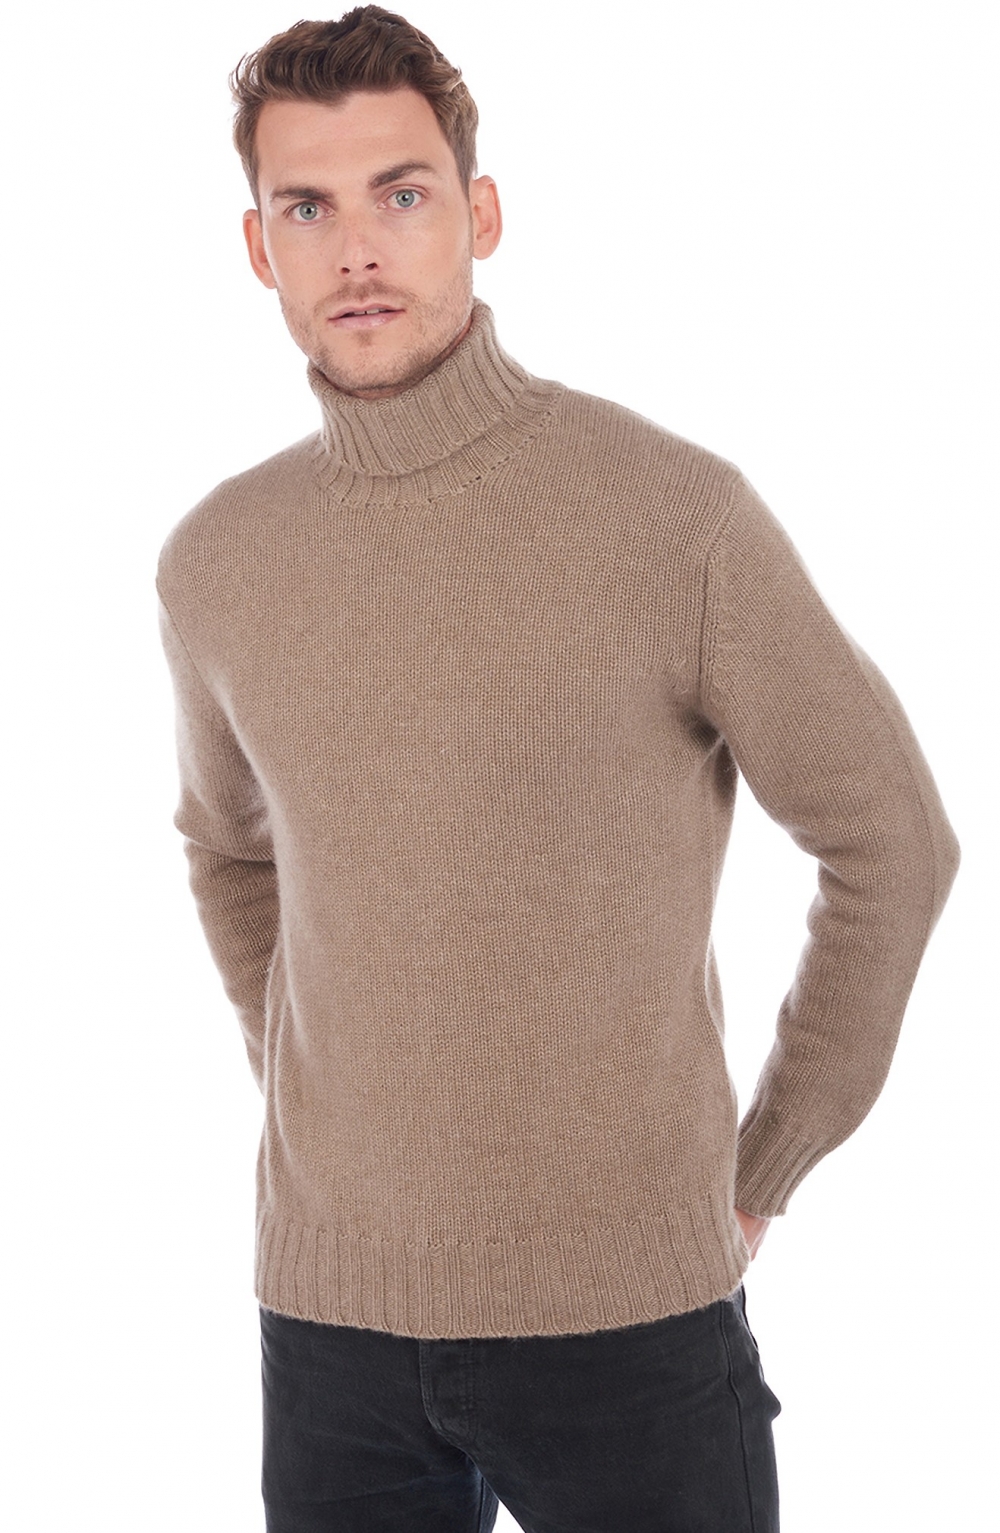 Cachemire pull homme col roule achille natural brown m